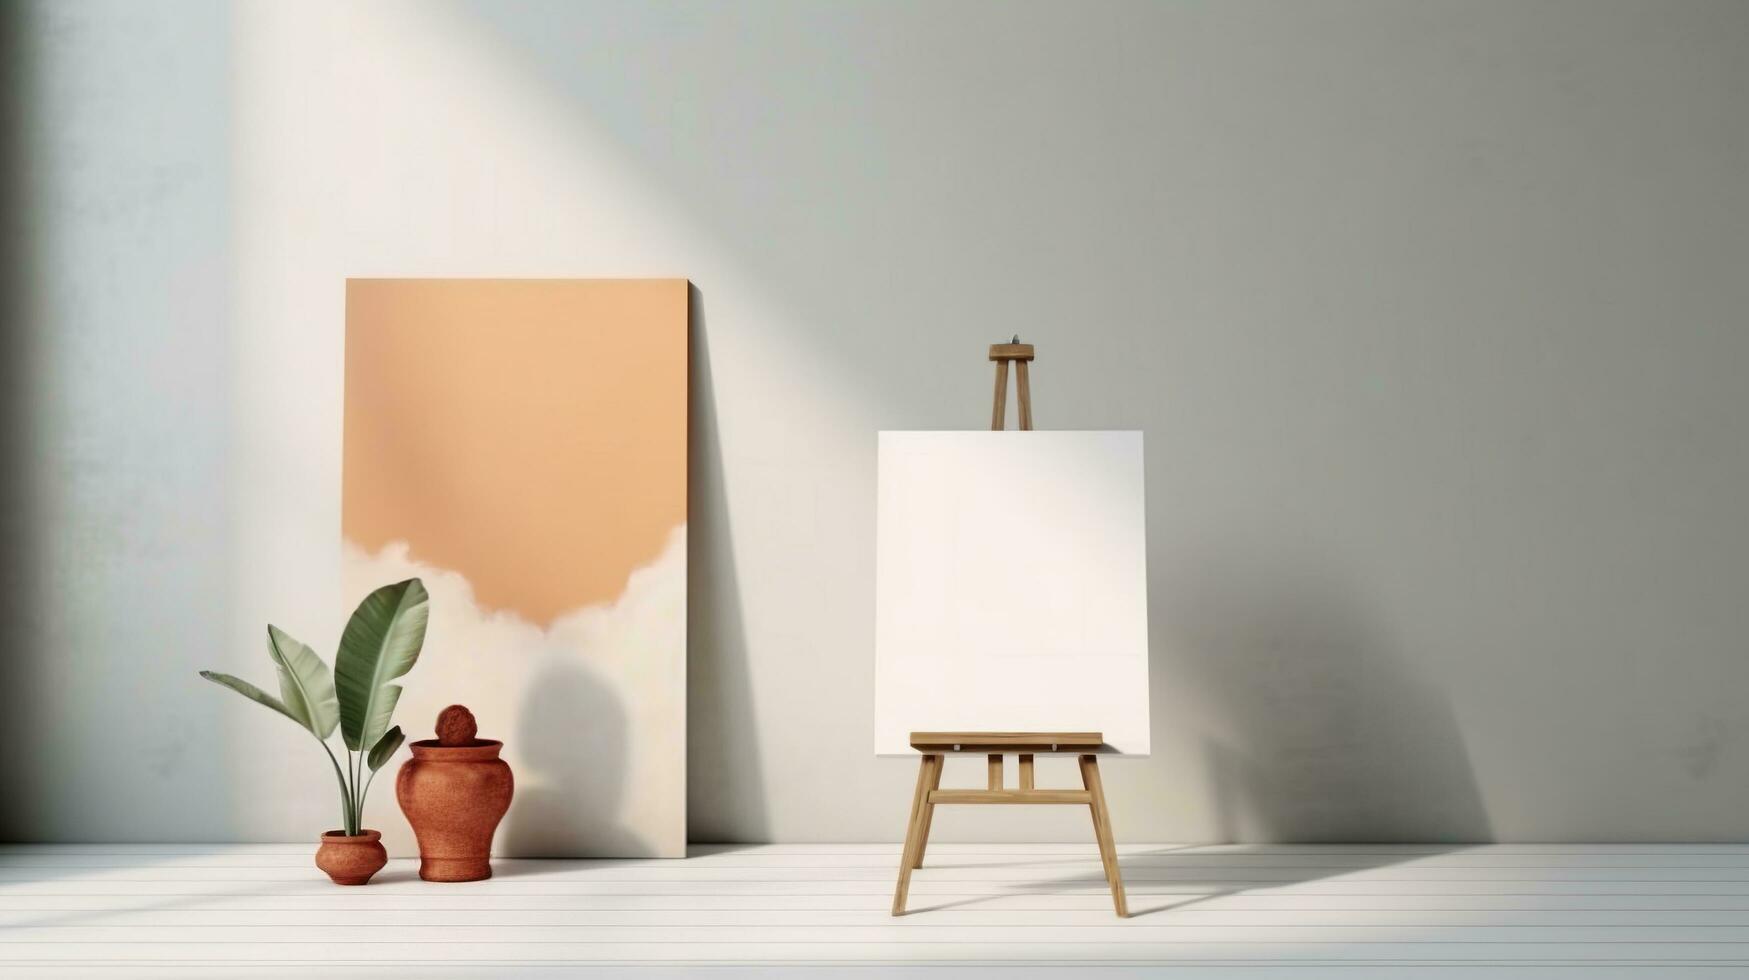 AI generated White canvas for mockup with blurred brick wall room interior photo